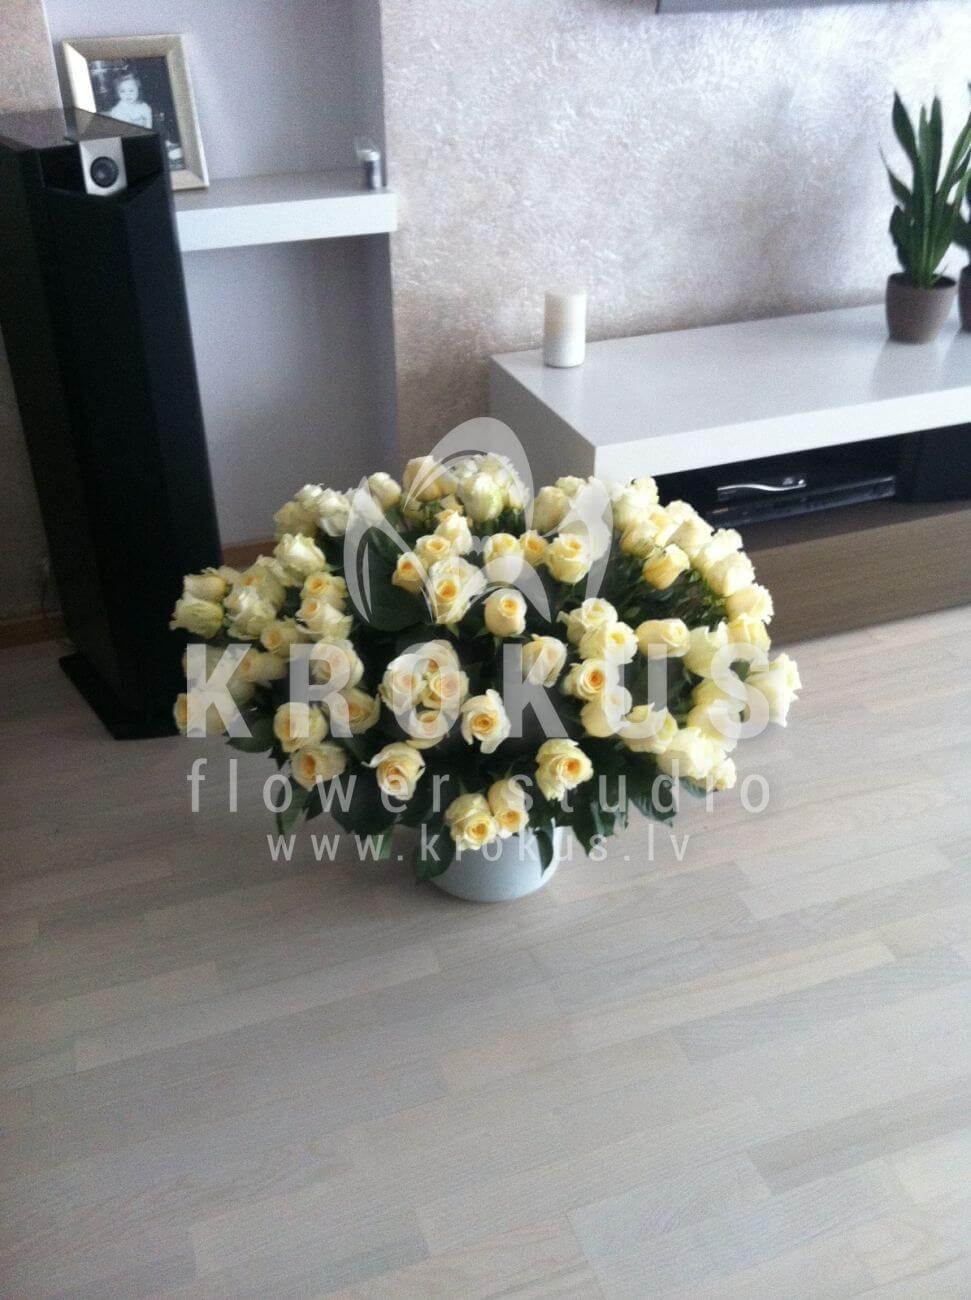 Deliver flowers to Latvia (cream roses)